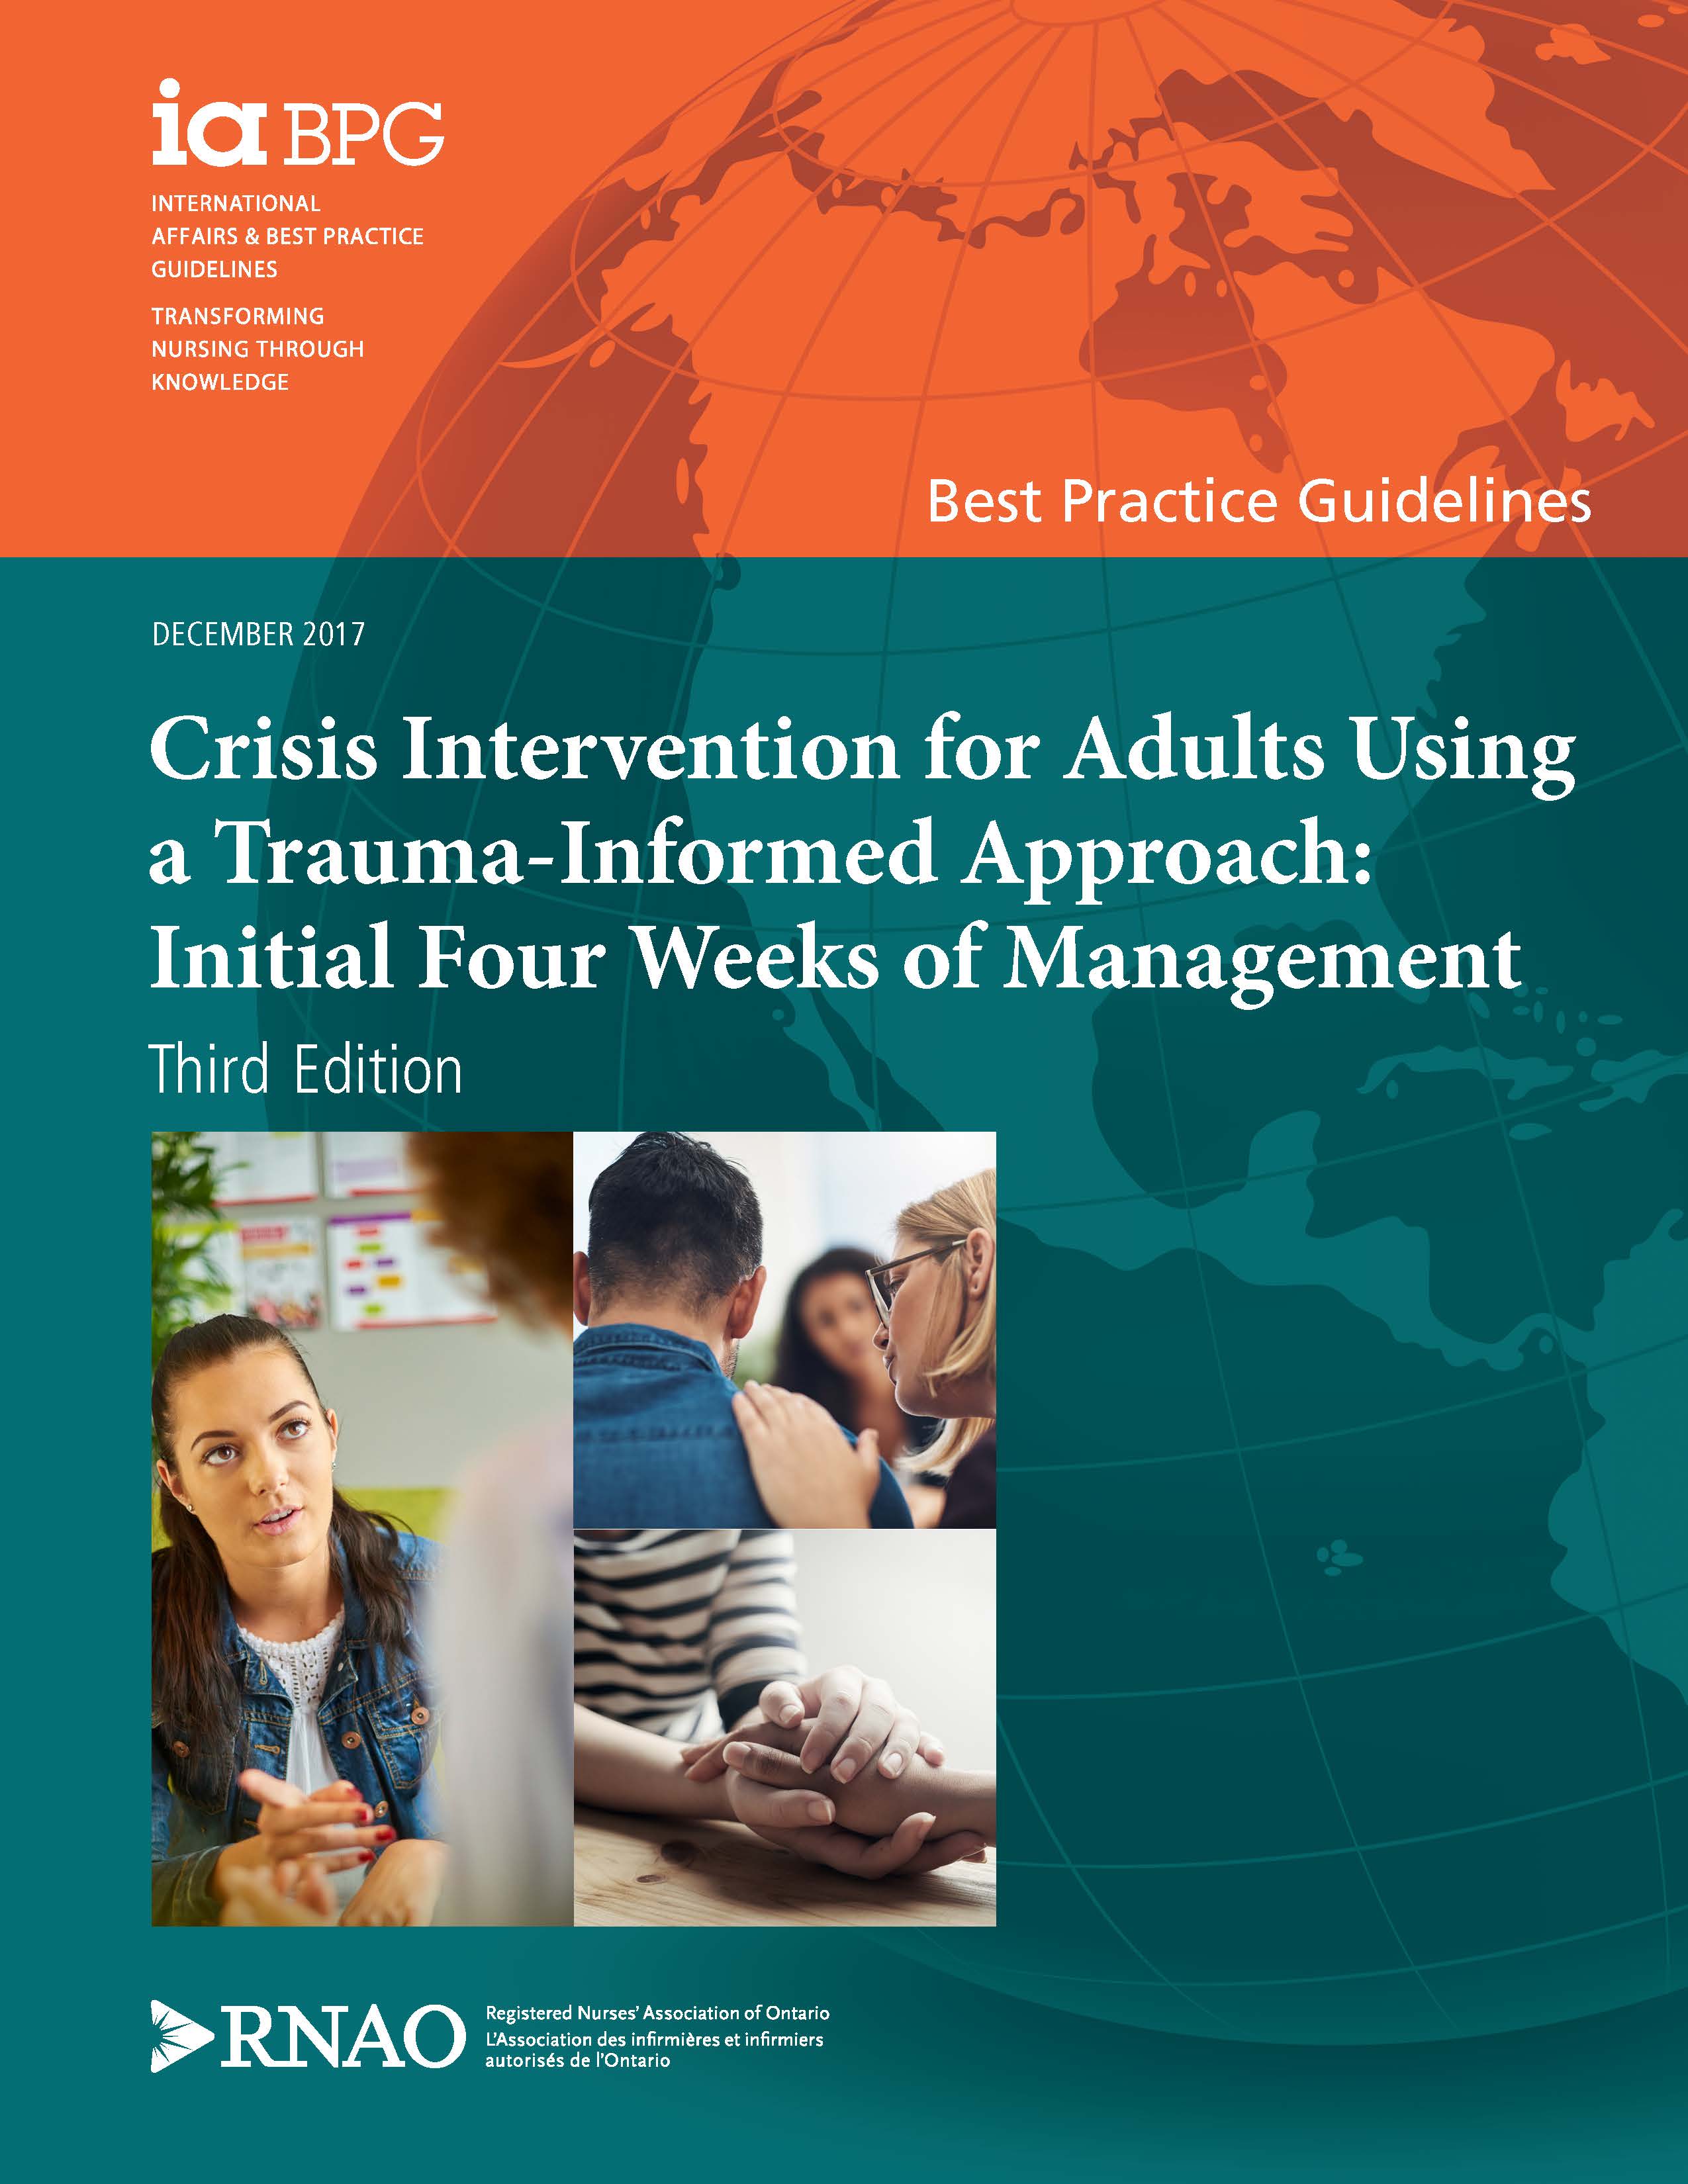 Crisis Intervention for Adults Using a Trauma-Informed Approach: Initial Four Weeks of Management Third Edition